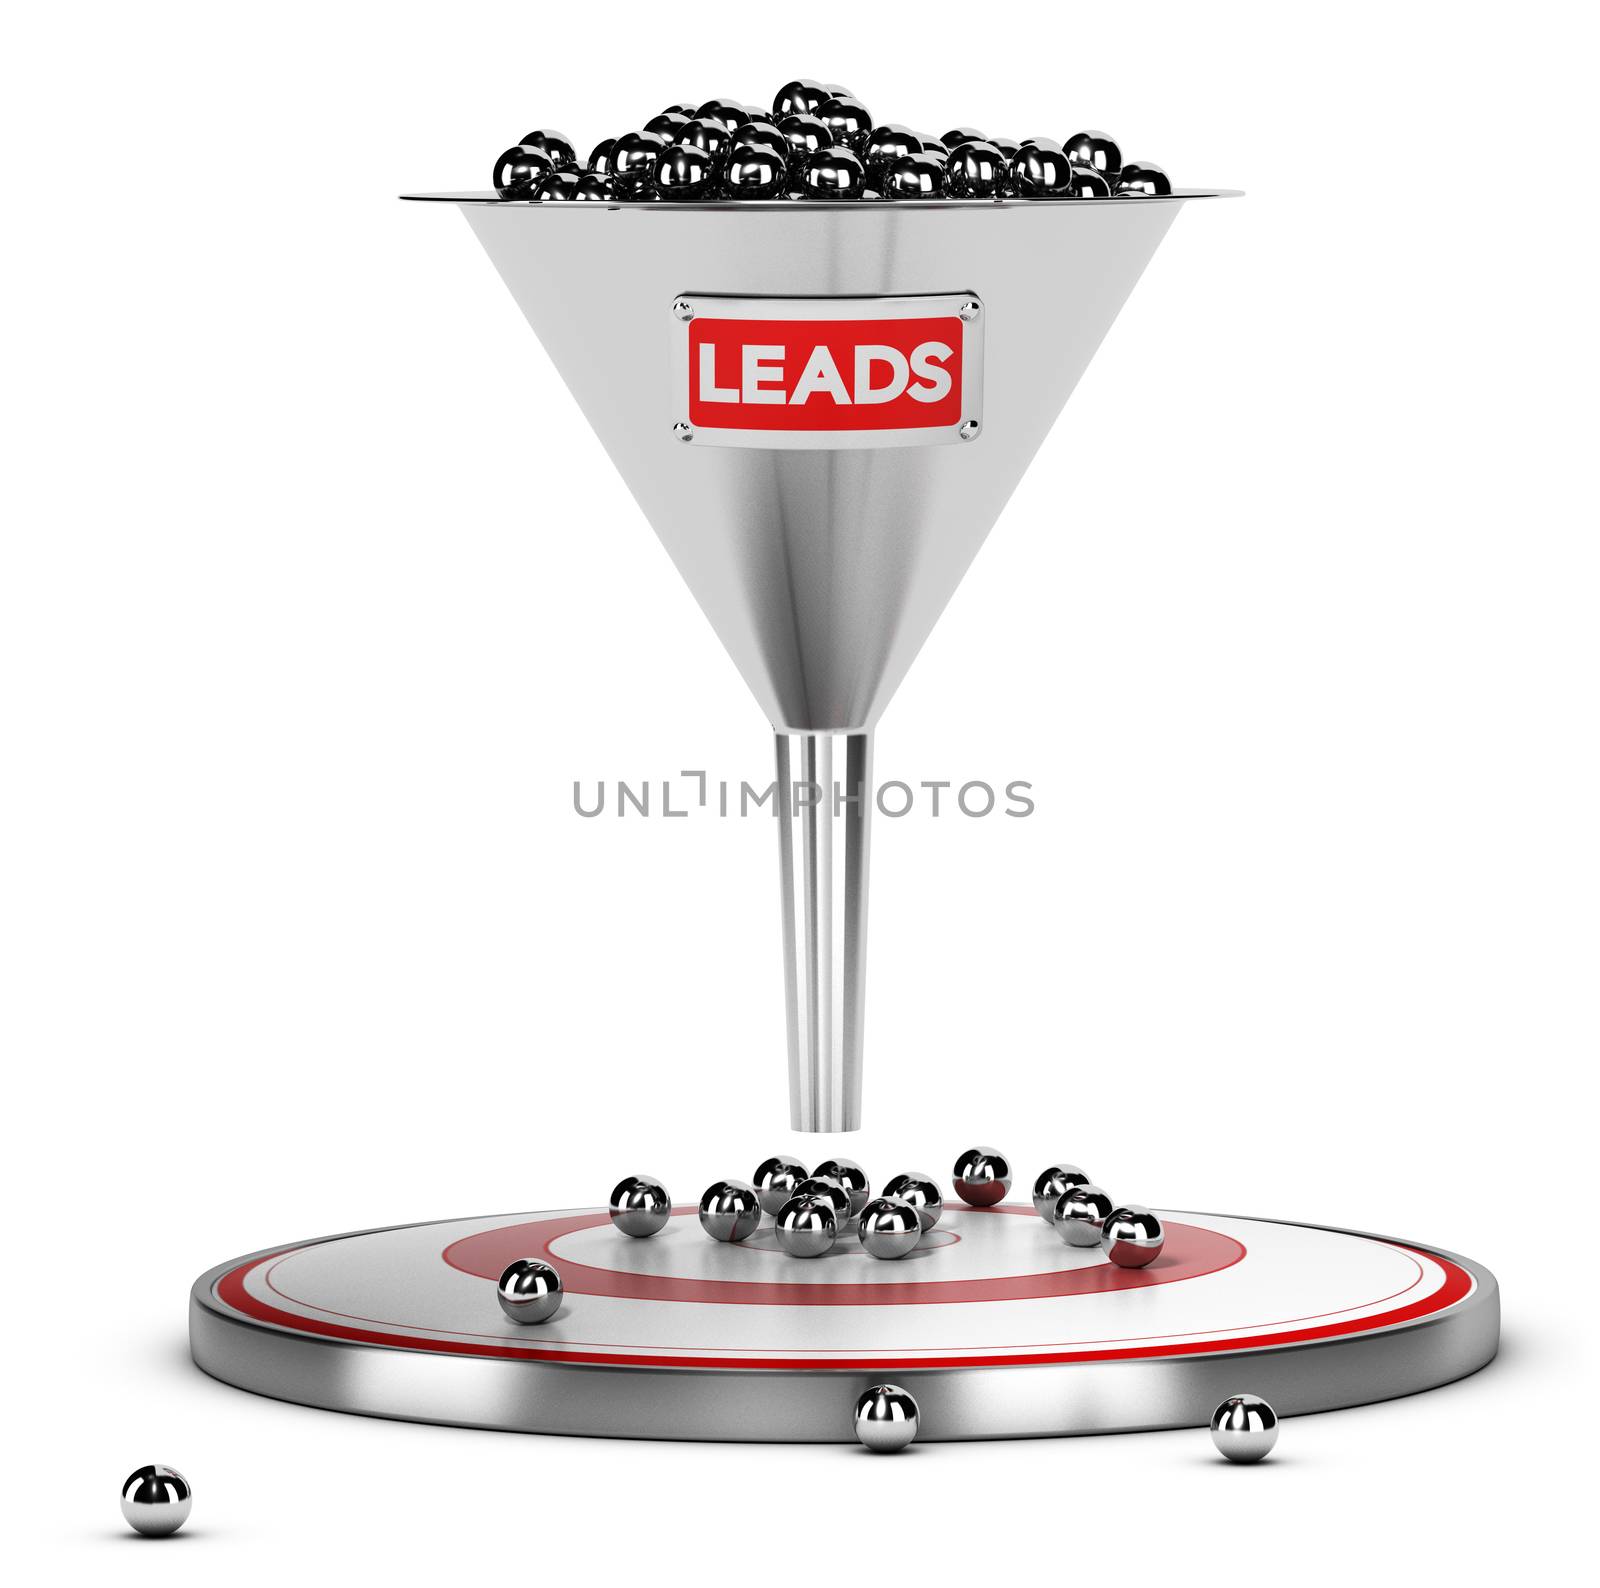 funnel with many metallic spheres and one target over white background. Illustration concept of sales lead nurturing